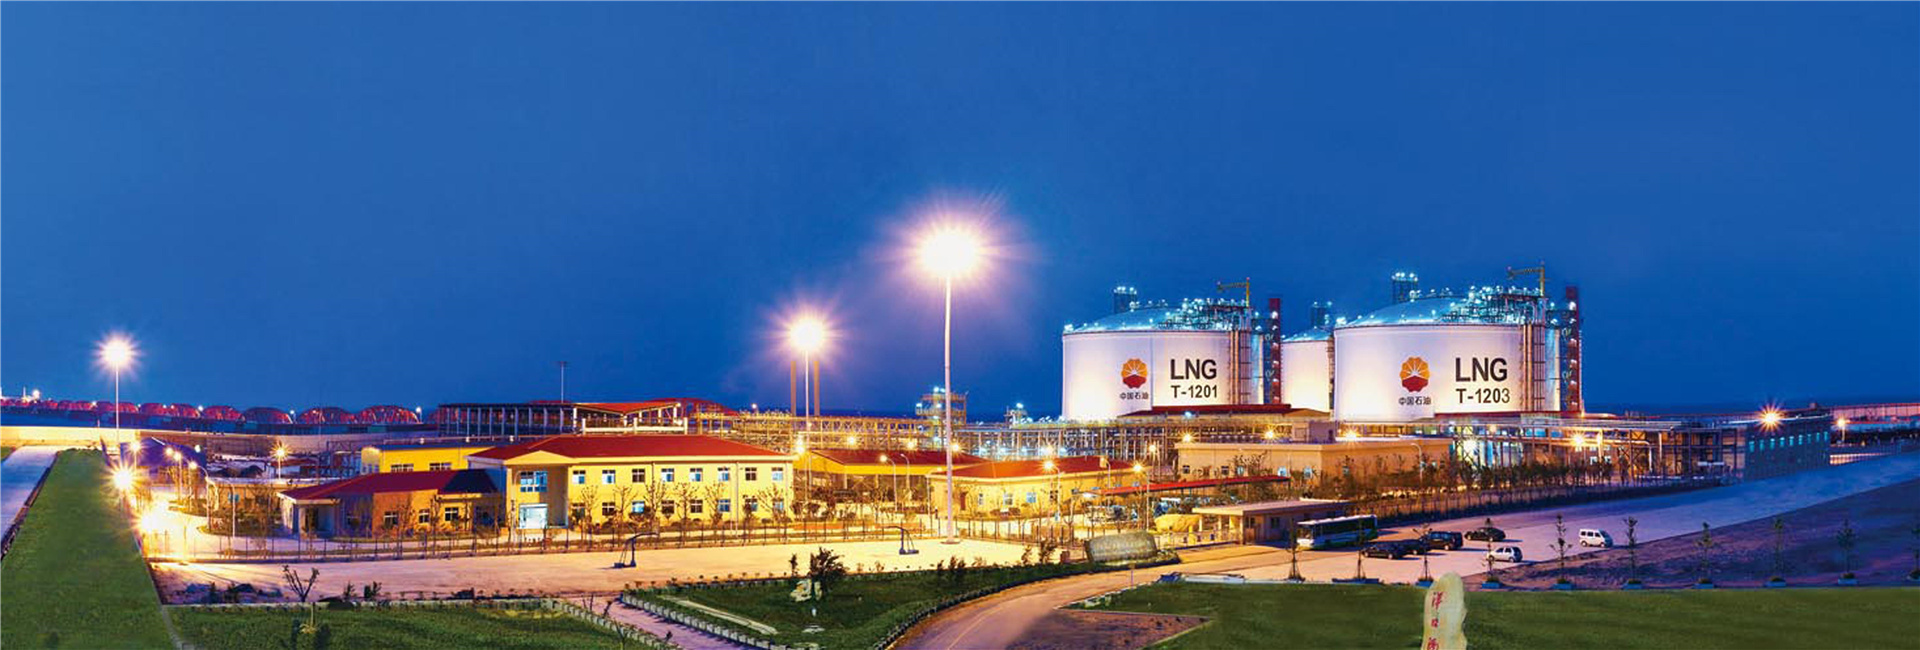 Yangkou port LNG terminal in Rudong acts as global LNG distribution center